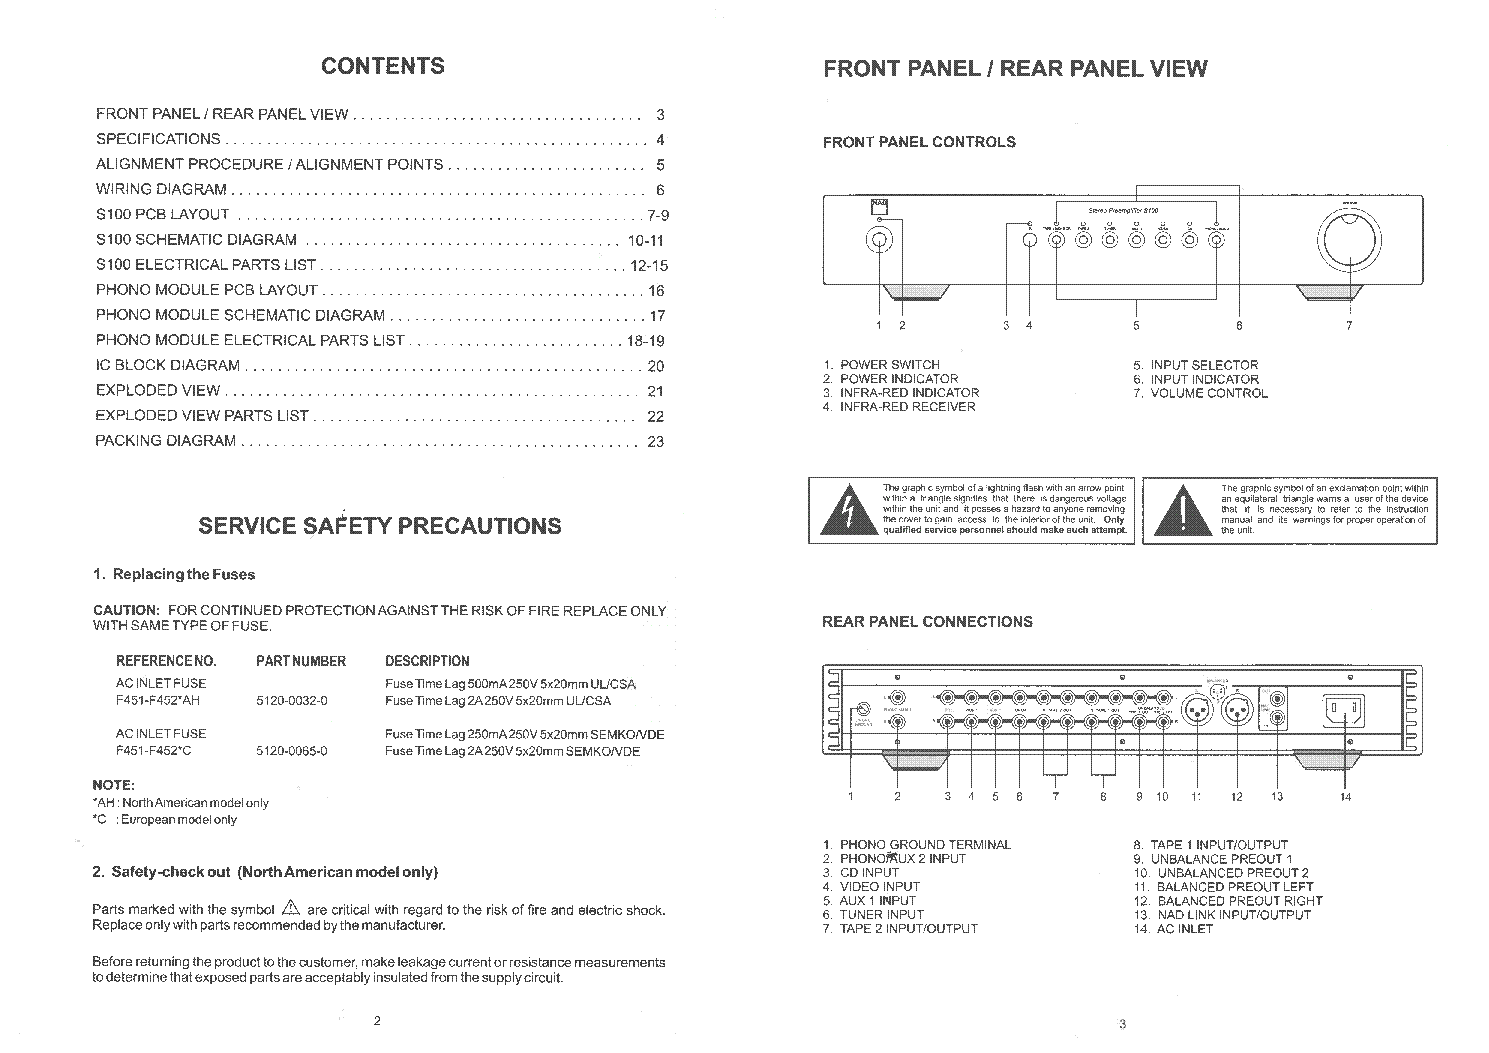 NAD S100 SM service manual (2nd page)